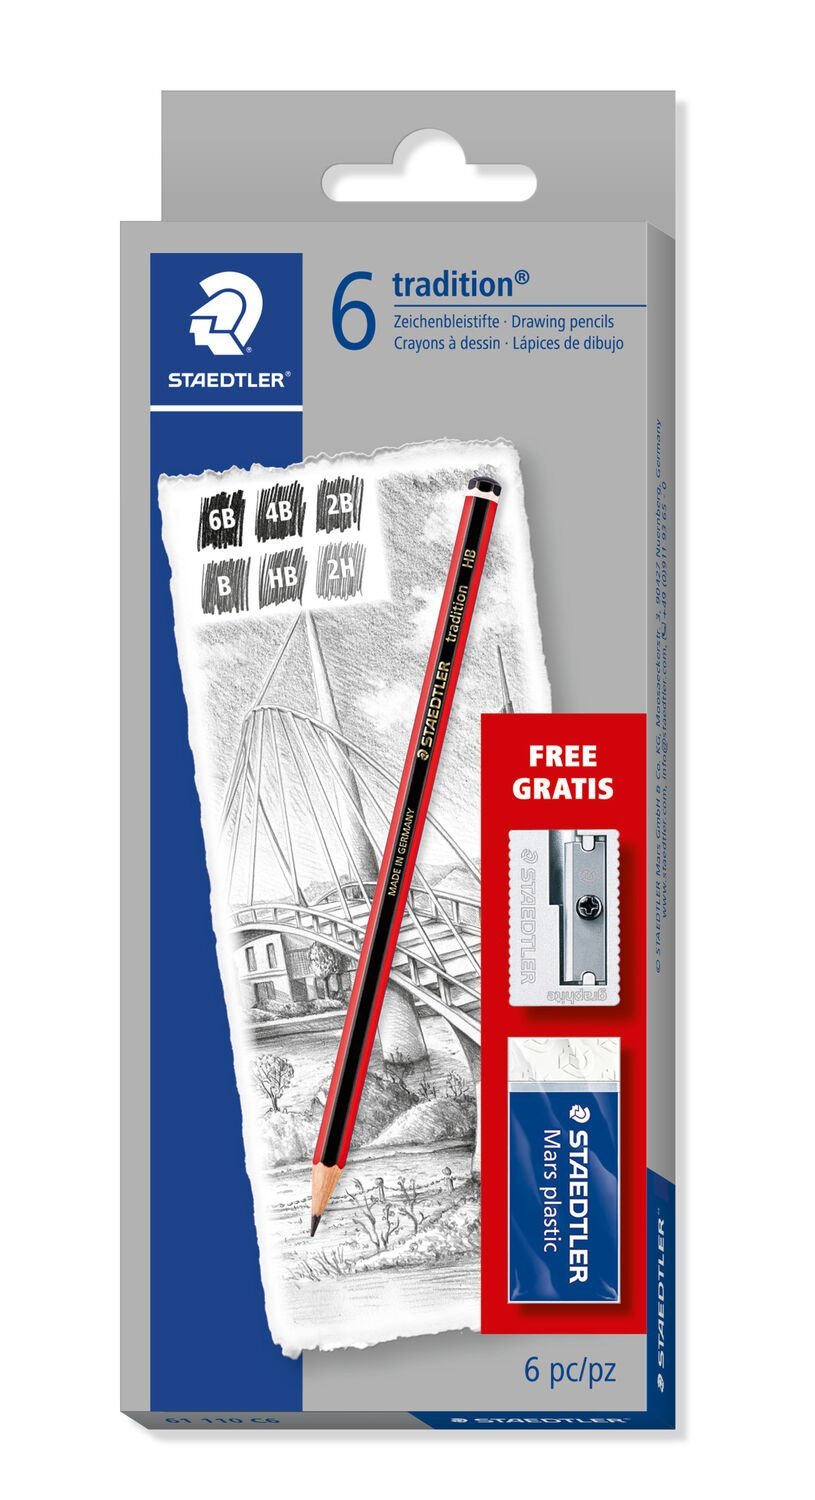 STAEDTLER TRADITION DRAWING PENCILS BOX OF 12 TRADITION PENCILS